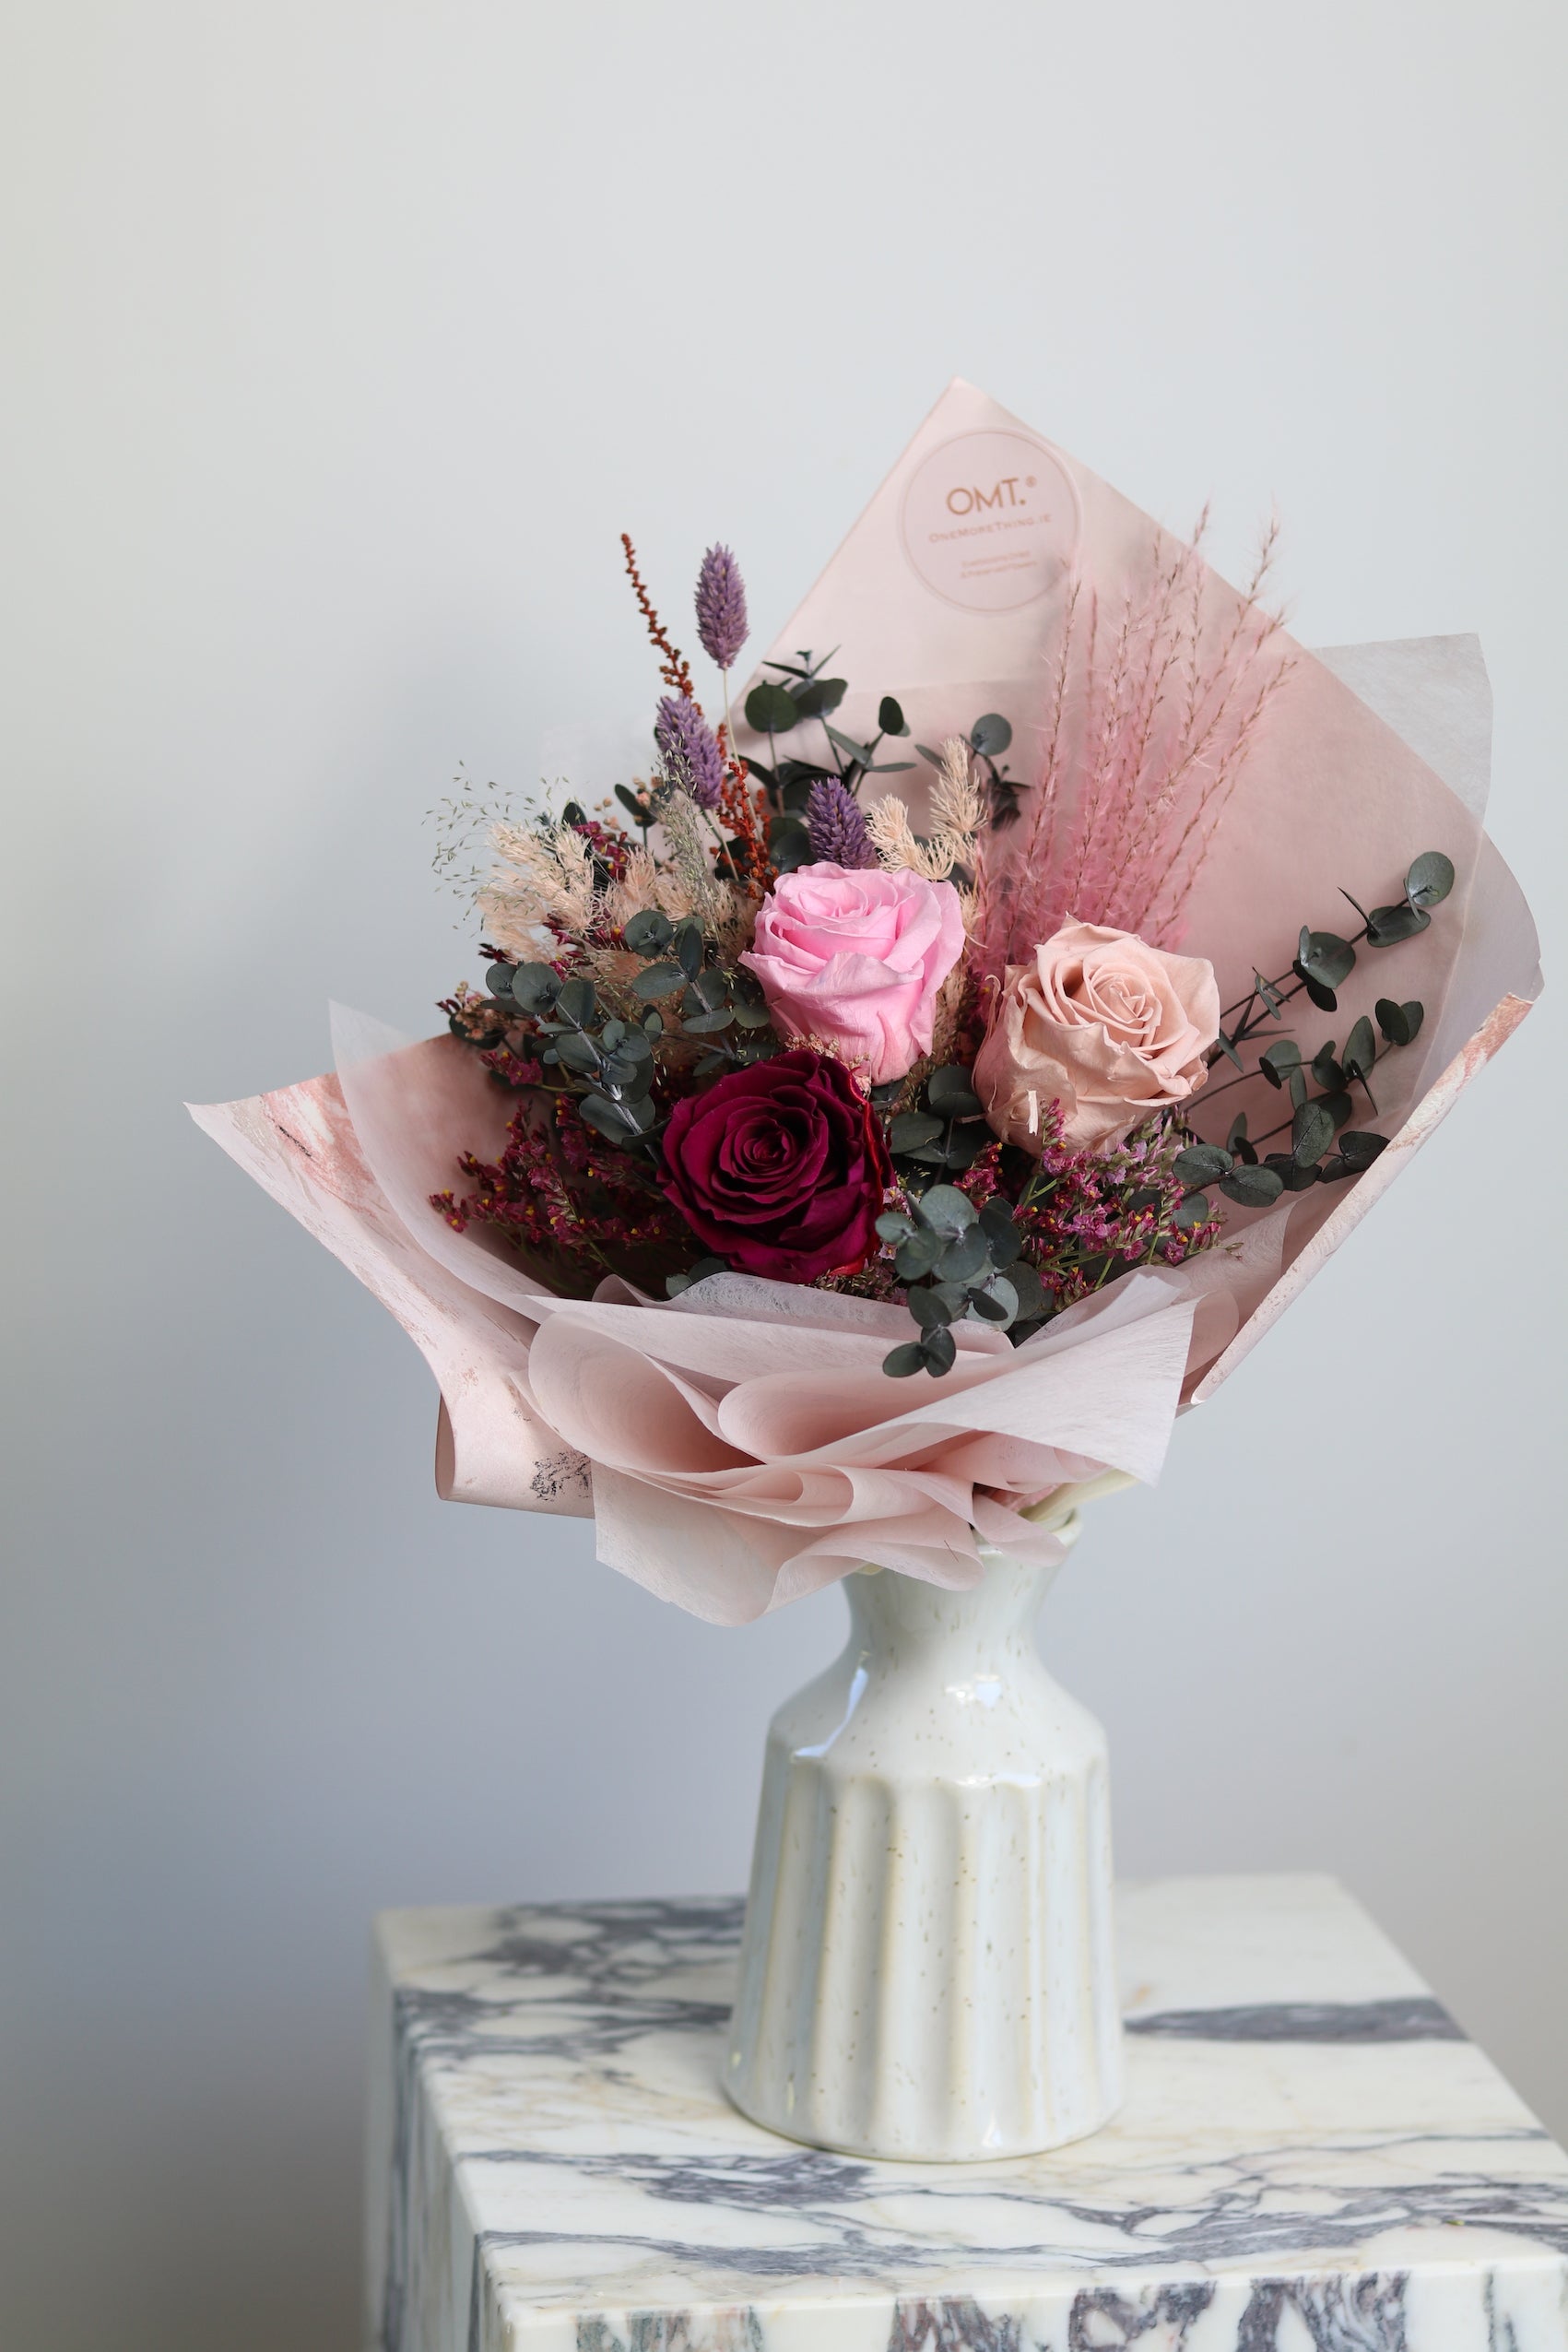 Appreciation Gift - Thank-you Petite Bouquet ONLY or Add a Linda Vase